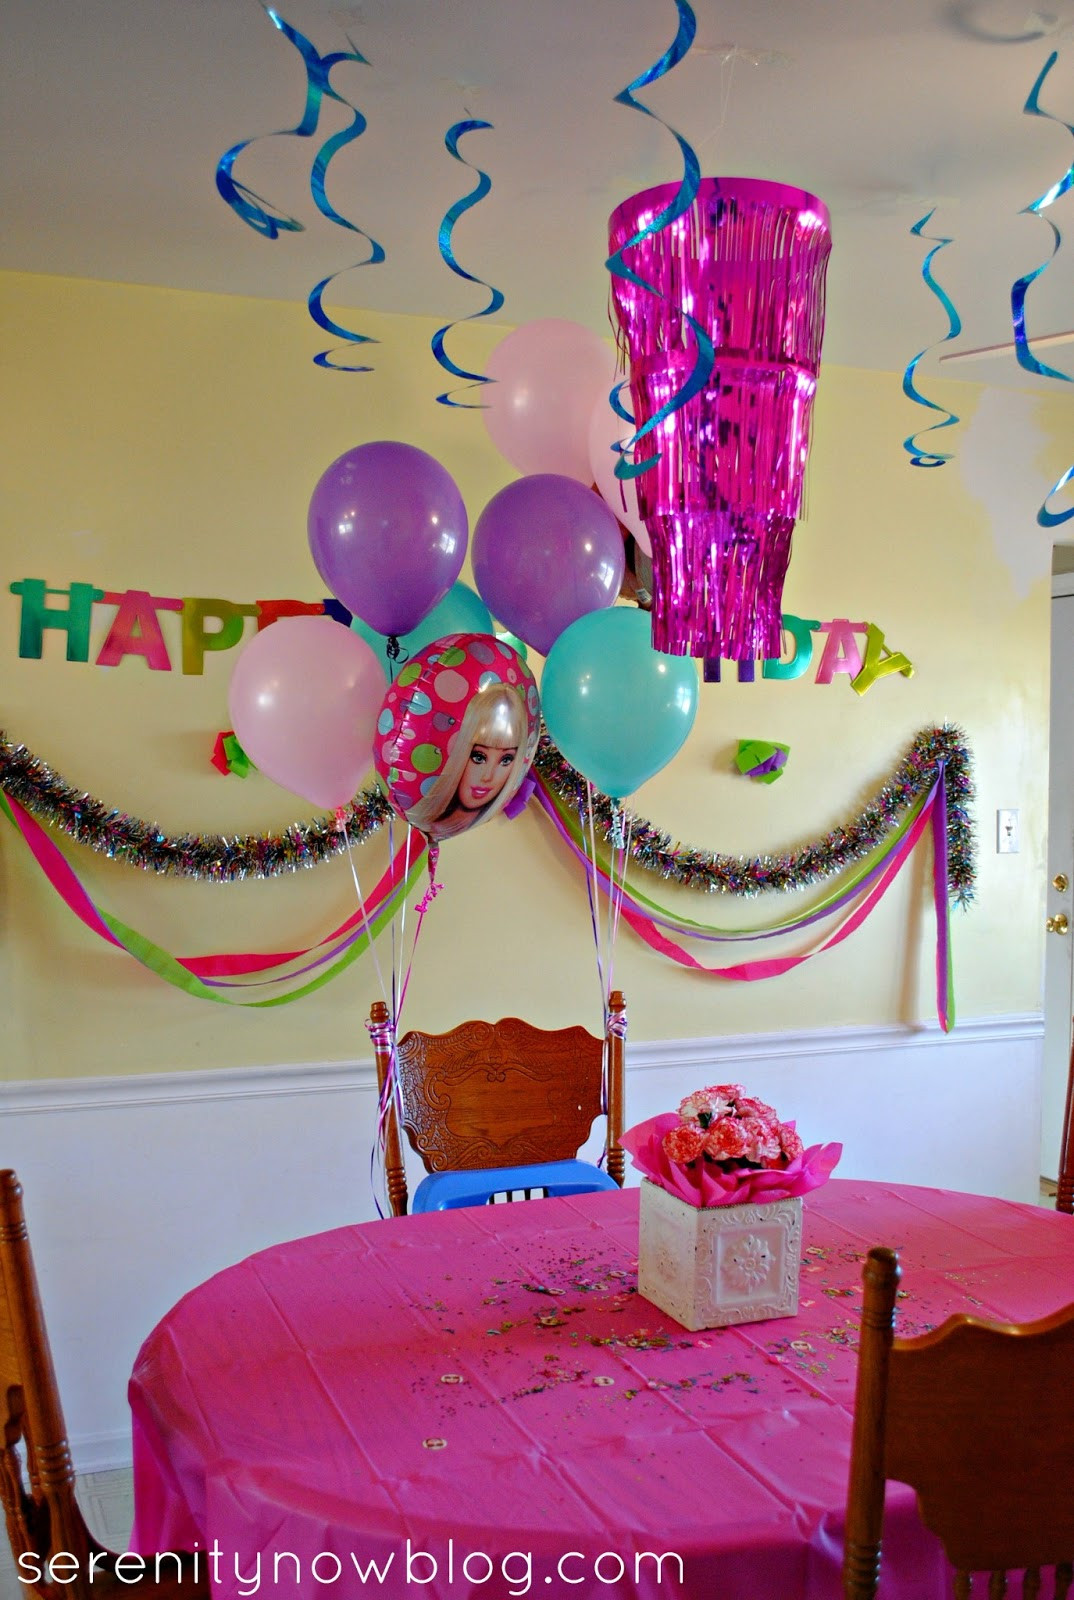 How To Decorate Birthday Party At Home
 Serenity Now Throw a Barbie Birthday Party at Home